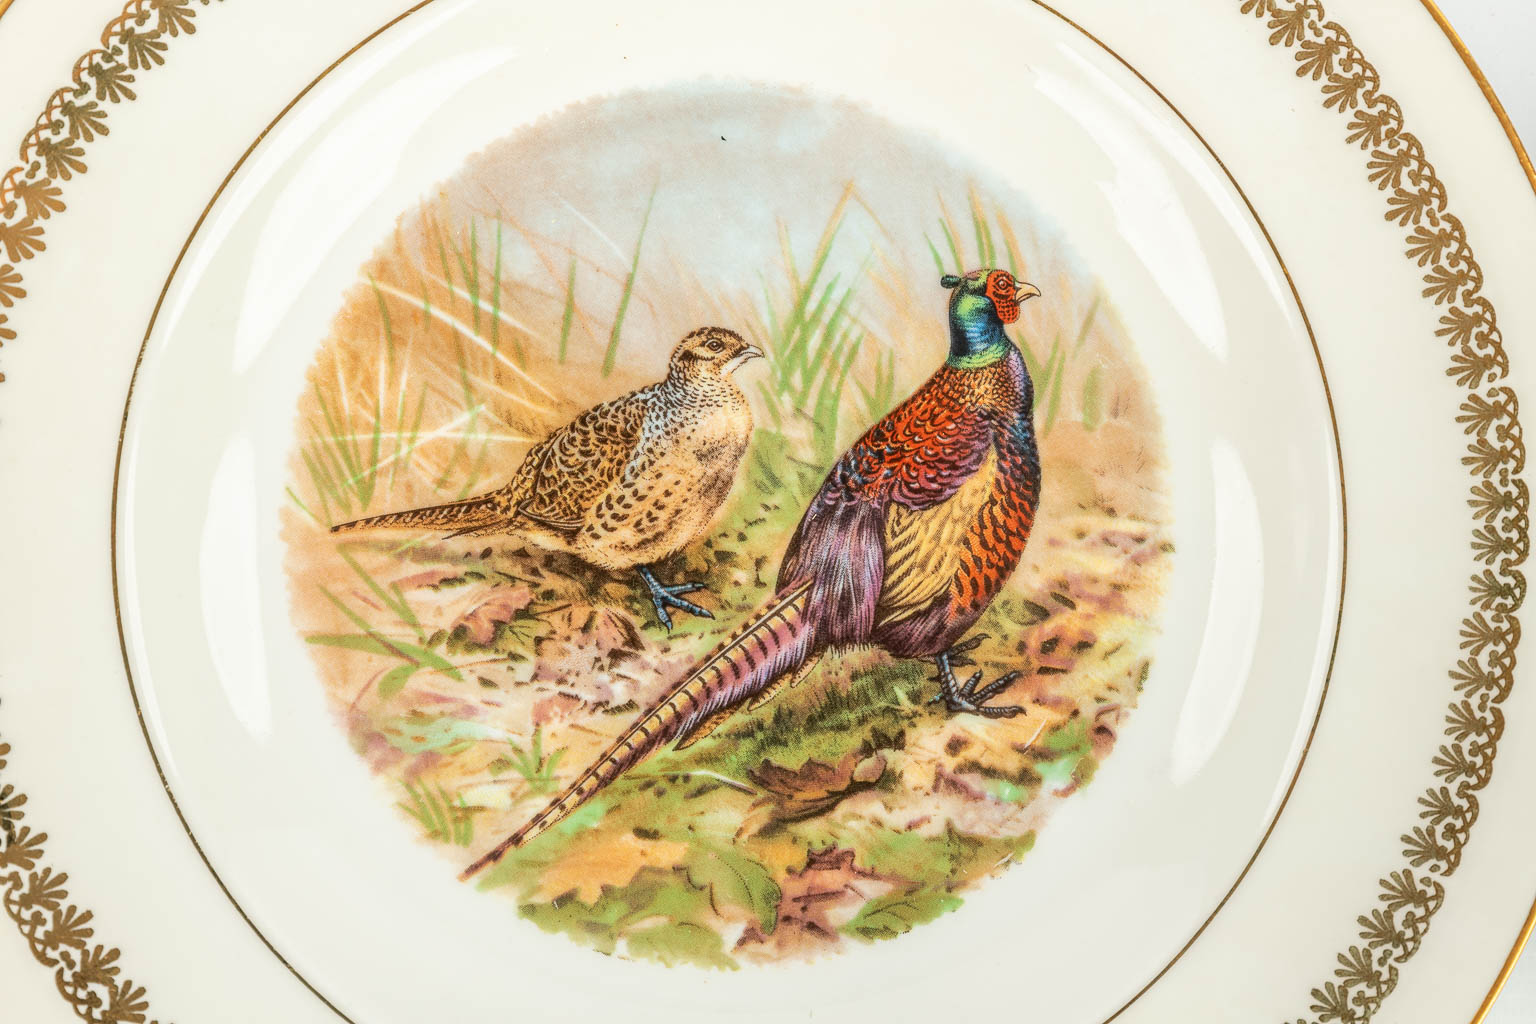 A 30-piece dinner service decorated with wildlife, made of porcelain and marked Porcelain de Limoges. (H:16,5cm)